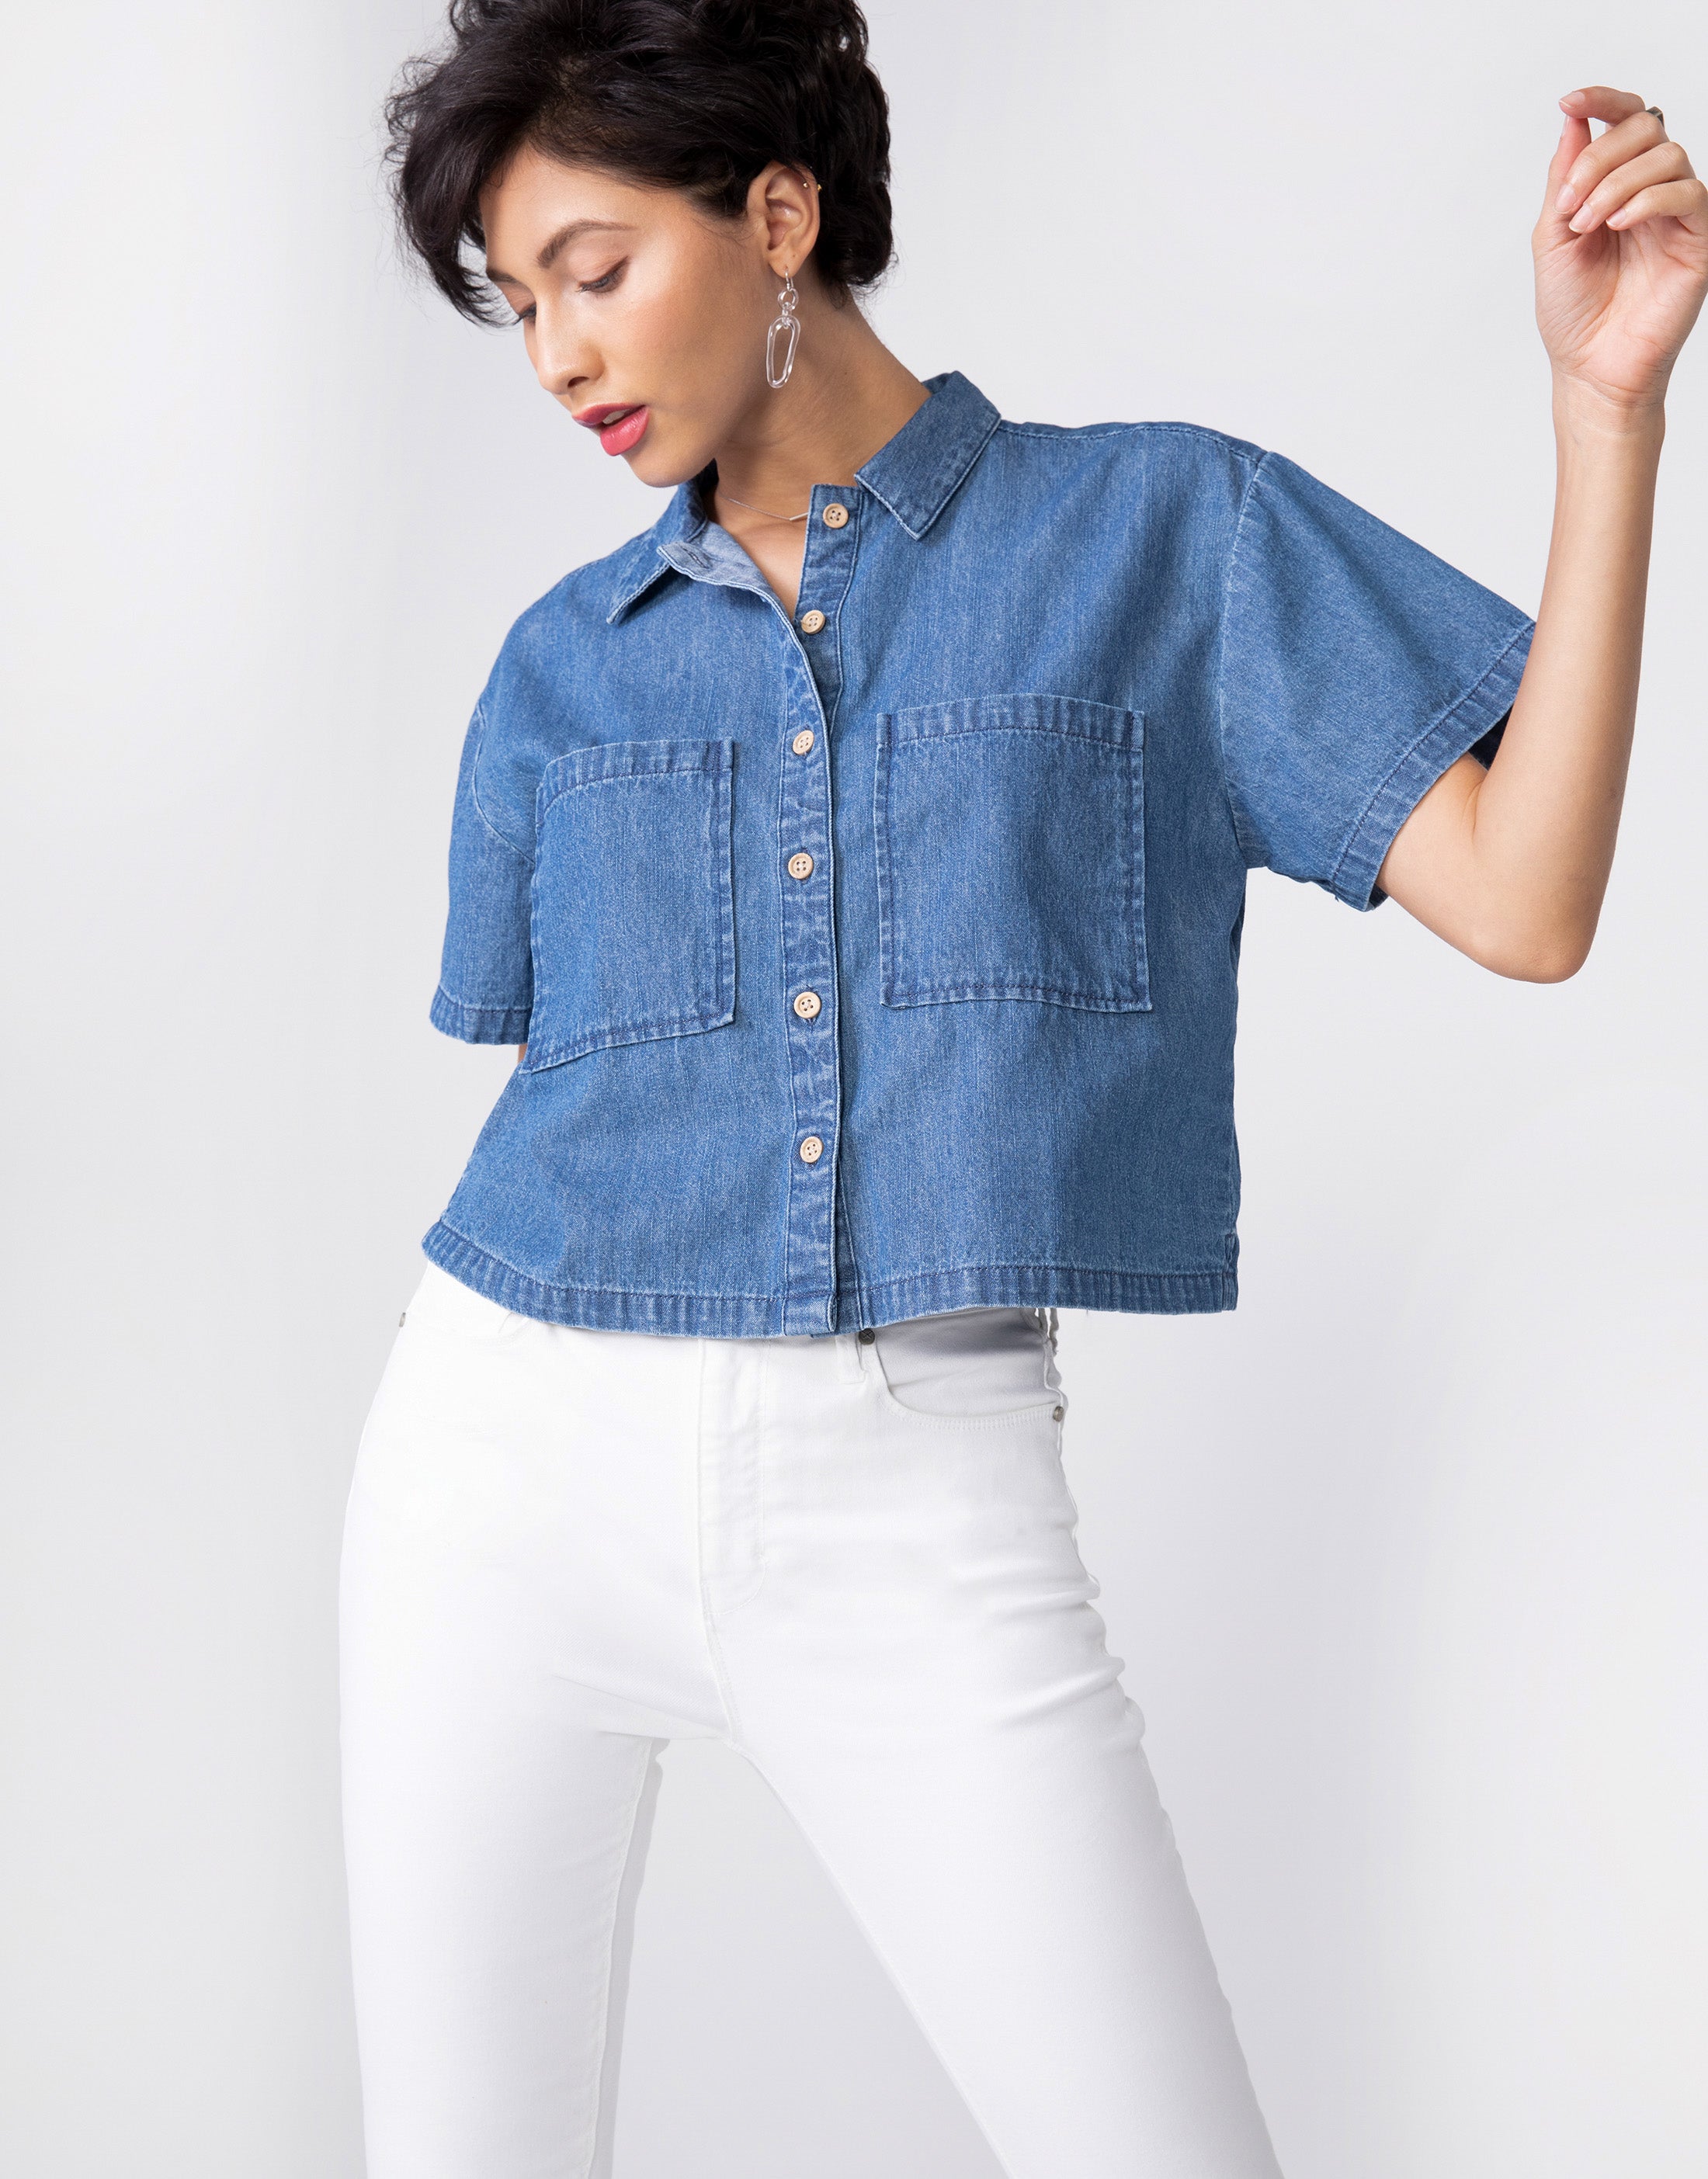 SAMI Boxy Cropped Button-Up in Chambray